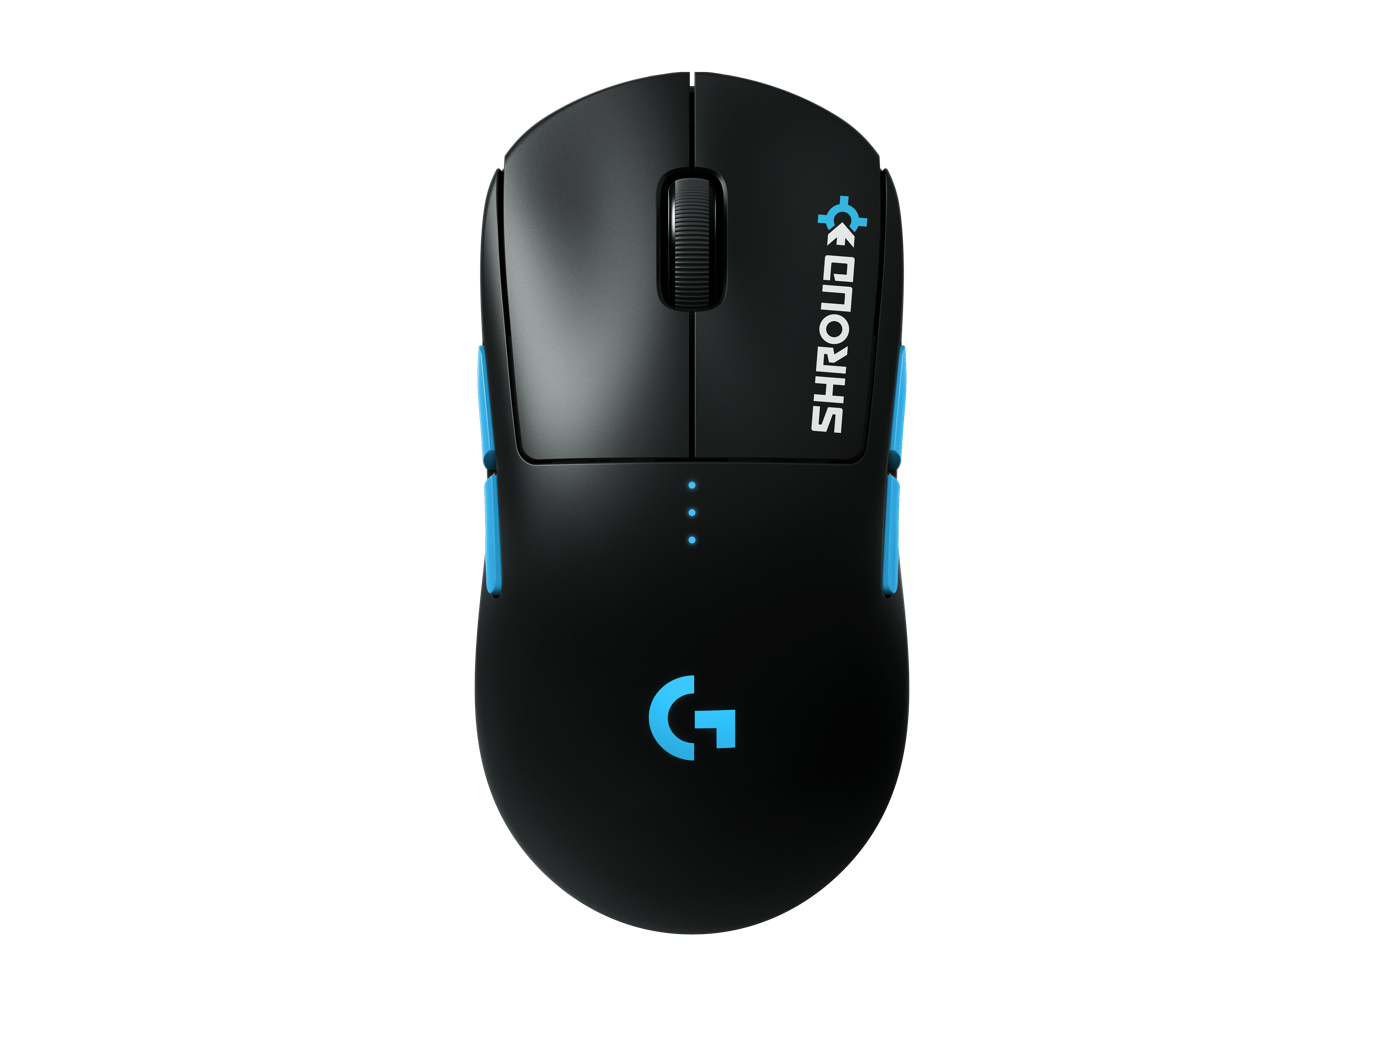 squeeze juice Ernest Shackleton Logitech G Pro Wireless Gaming Mouse for Esports Pros